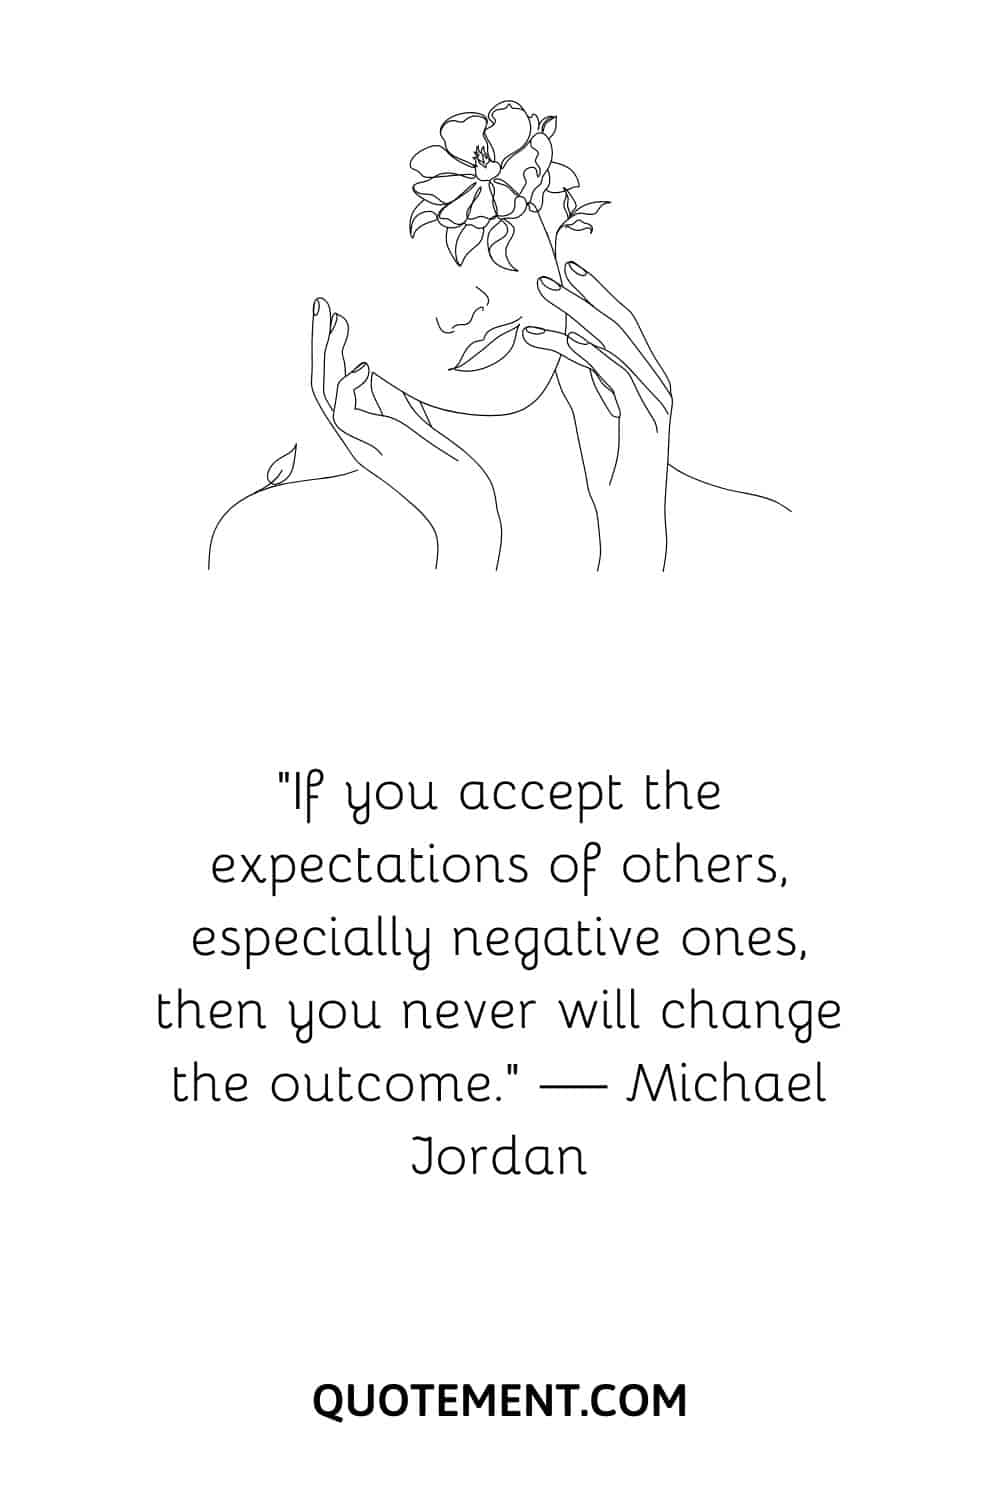 “If you accept the expectations of others, especially negative ones, then you never will change the outcome.” — Michael Jordan